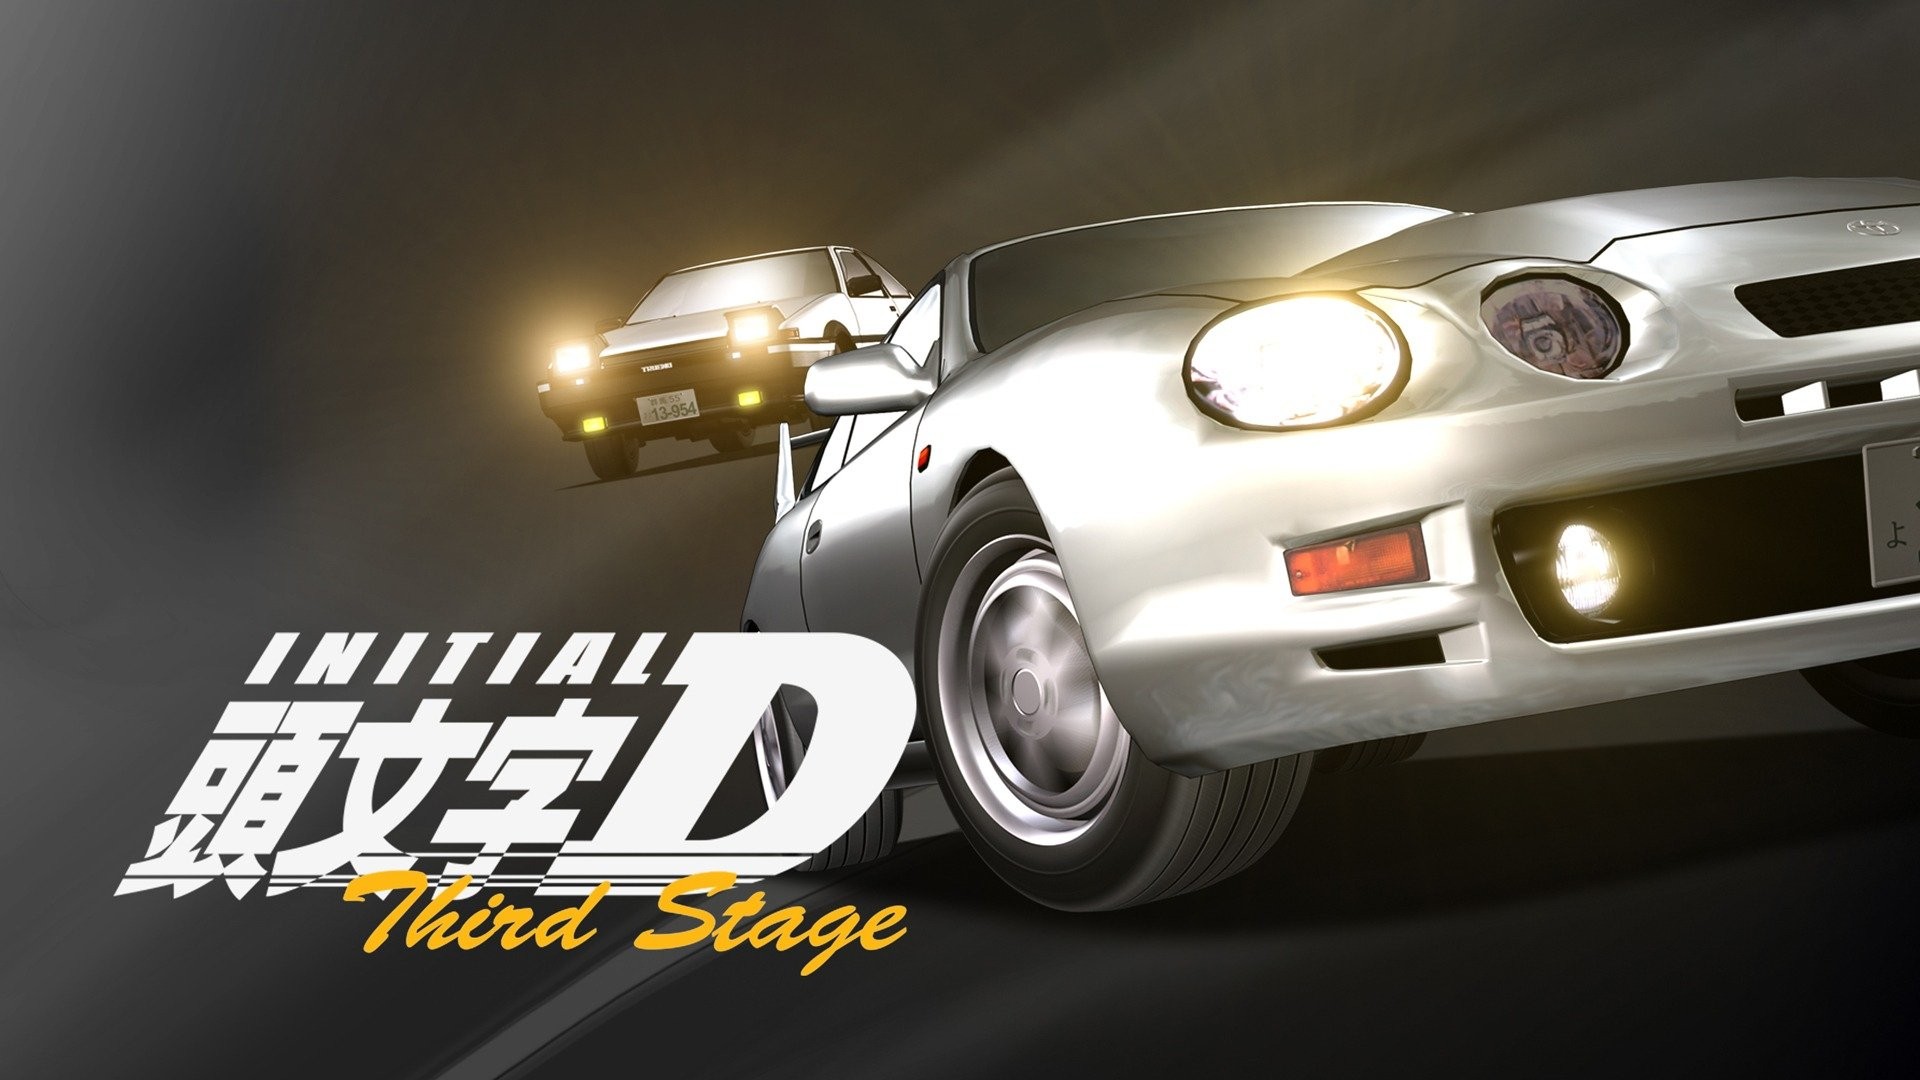 Initial D 3rd Stage The Movie Original Sound Tracks - Kyouichi's